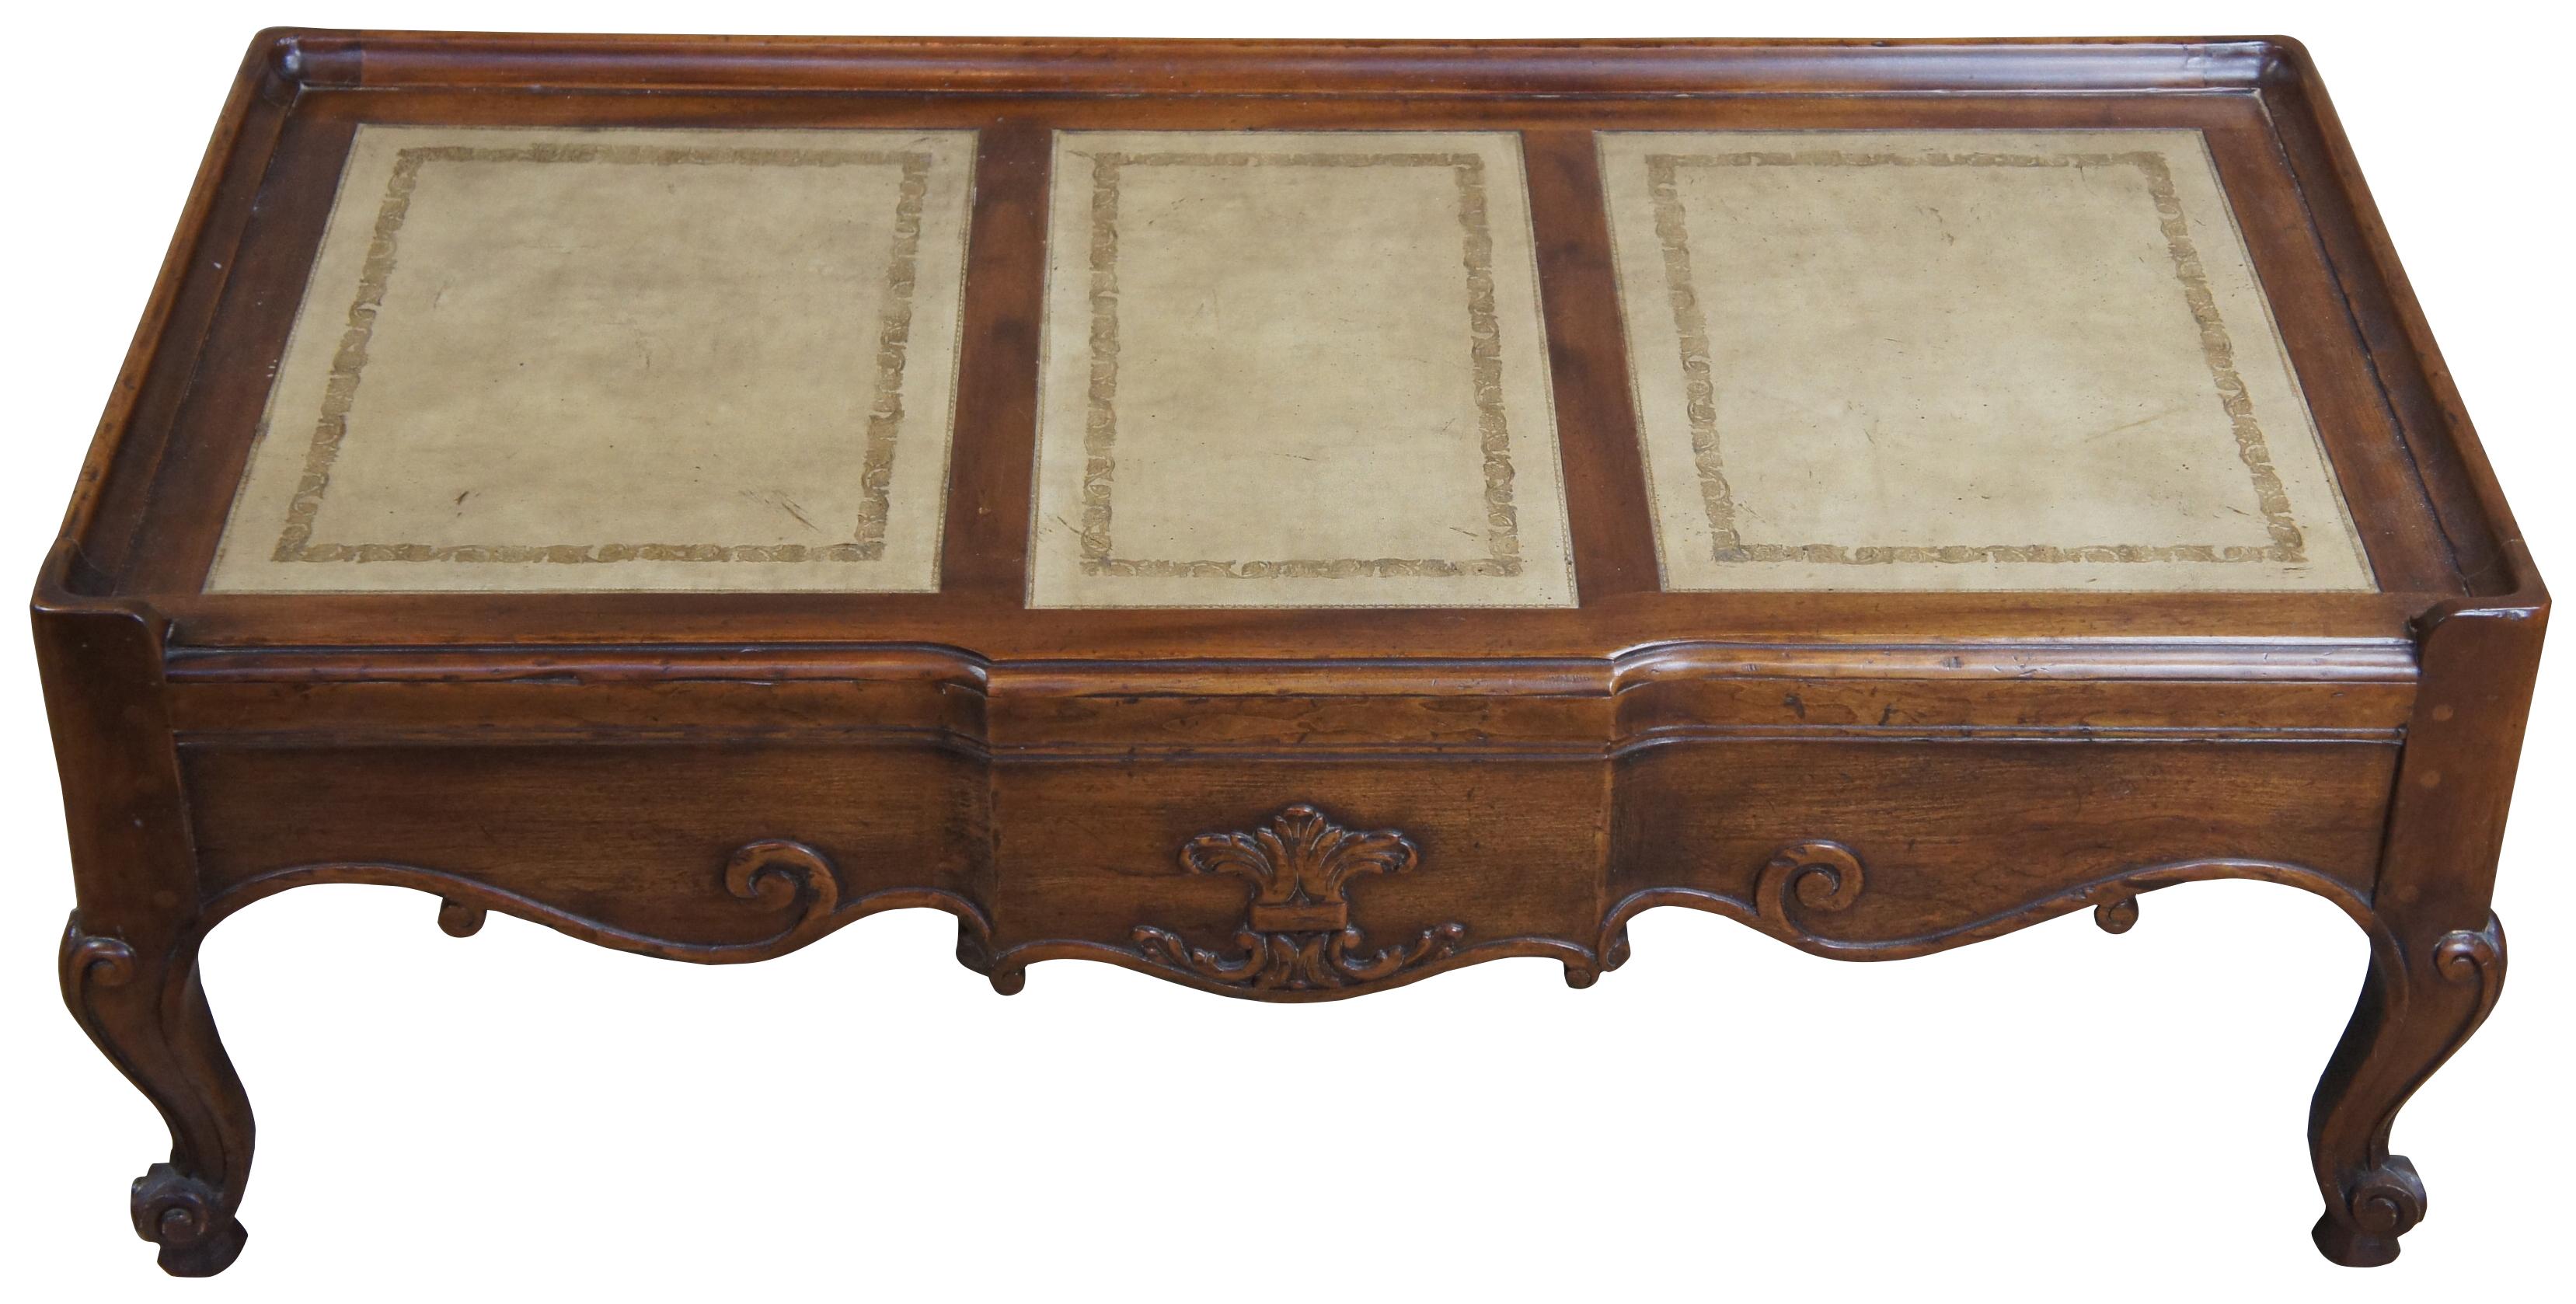 John Widdicomb coffee table, circa 1980s. Made from walnut with carved accents and a tooled leather inset top. Features a rectangular form over cabriole legs. Draws inspiration from Louis XV and Provincial styling. John Widdicomb of Grand Rapids,